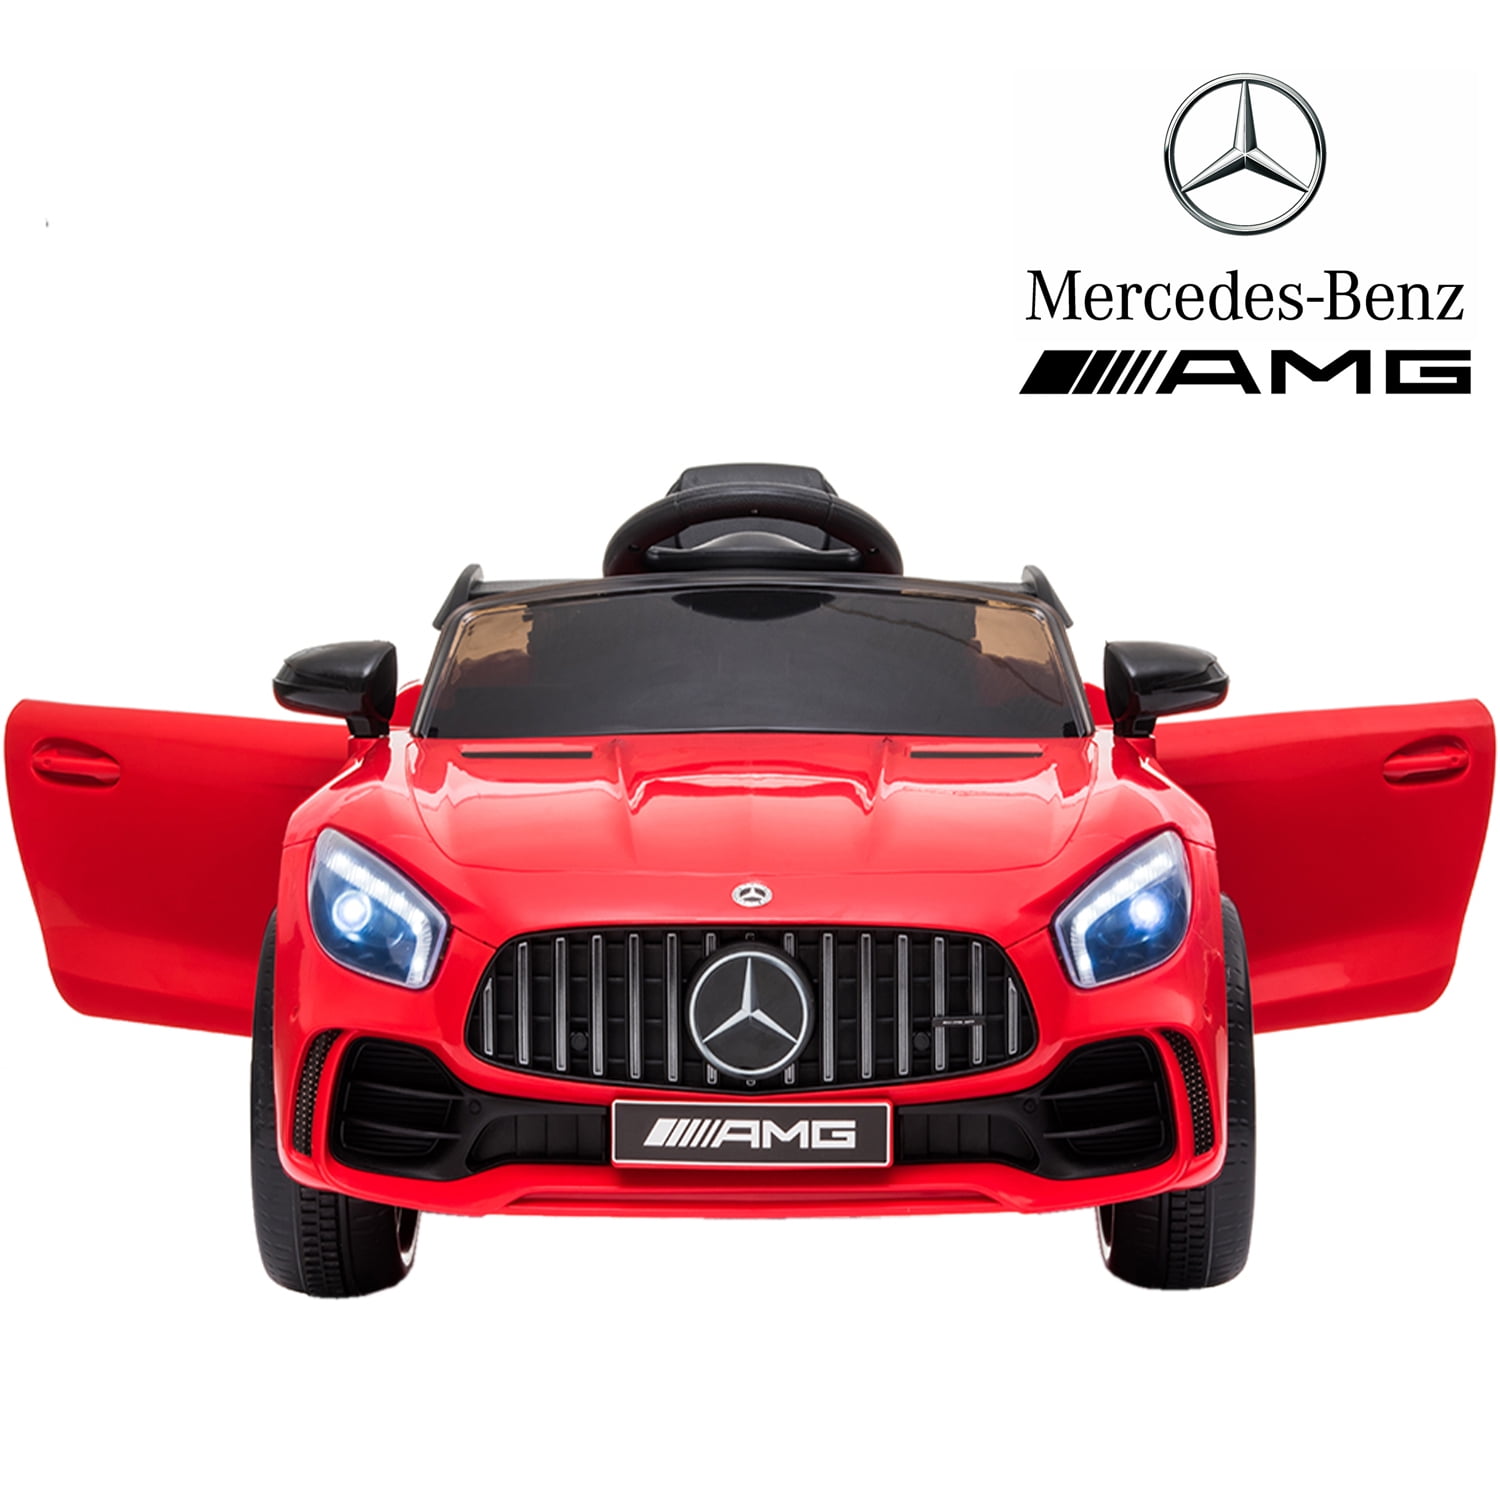 12V Mercedes Benz GLE Licensed Kids Ride On Car RC Electric Vehicle w/ MP3 Red 